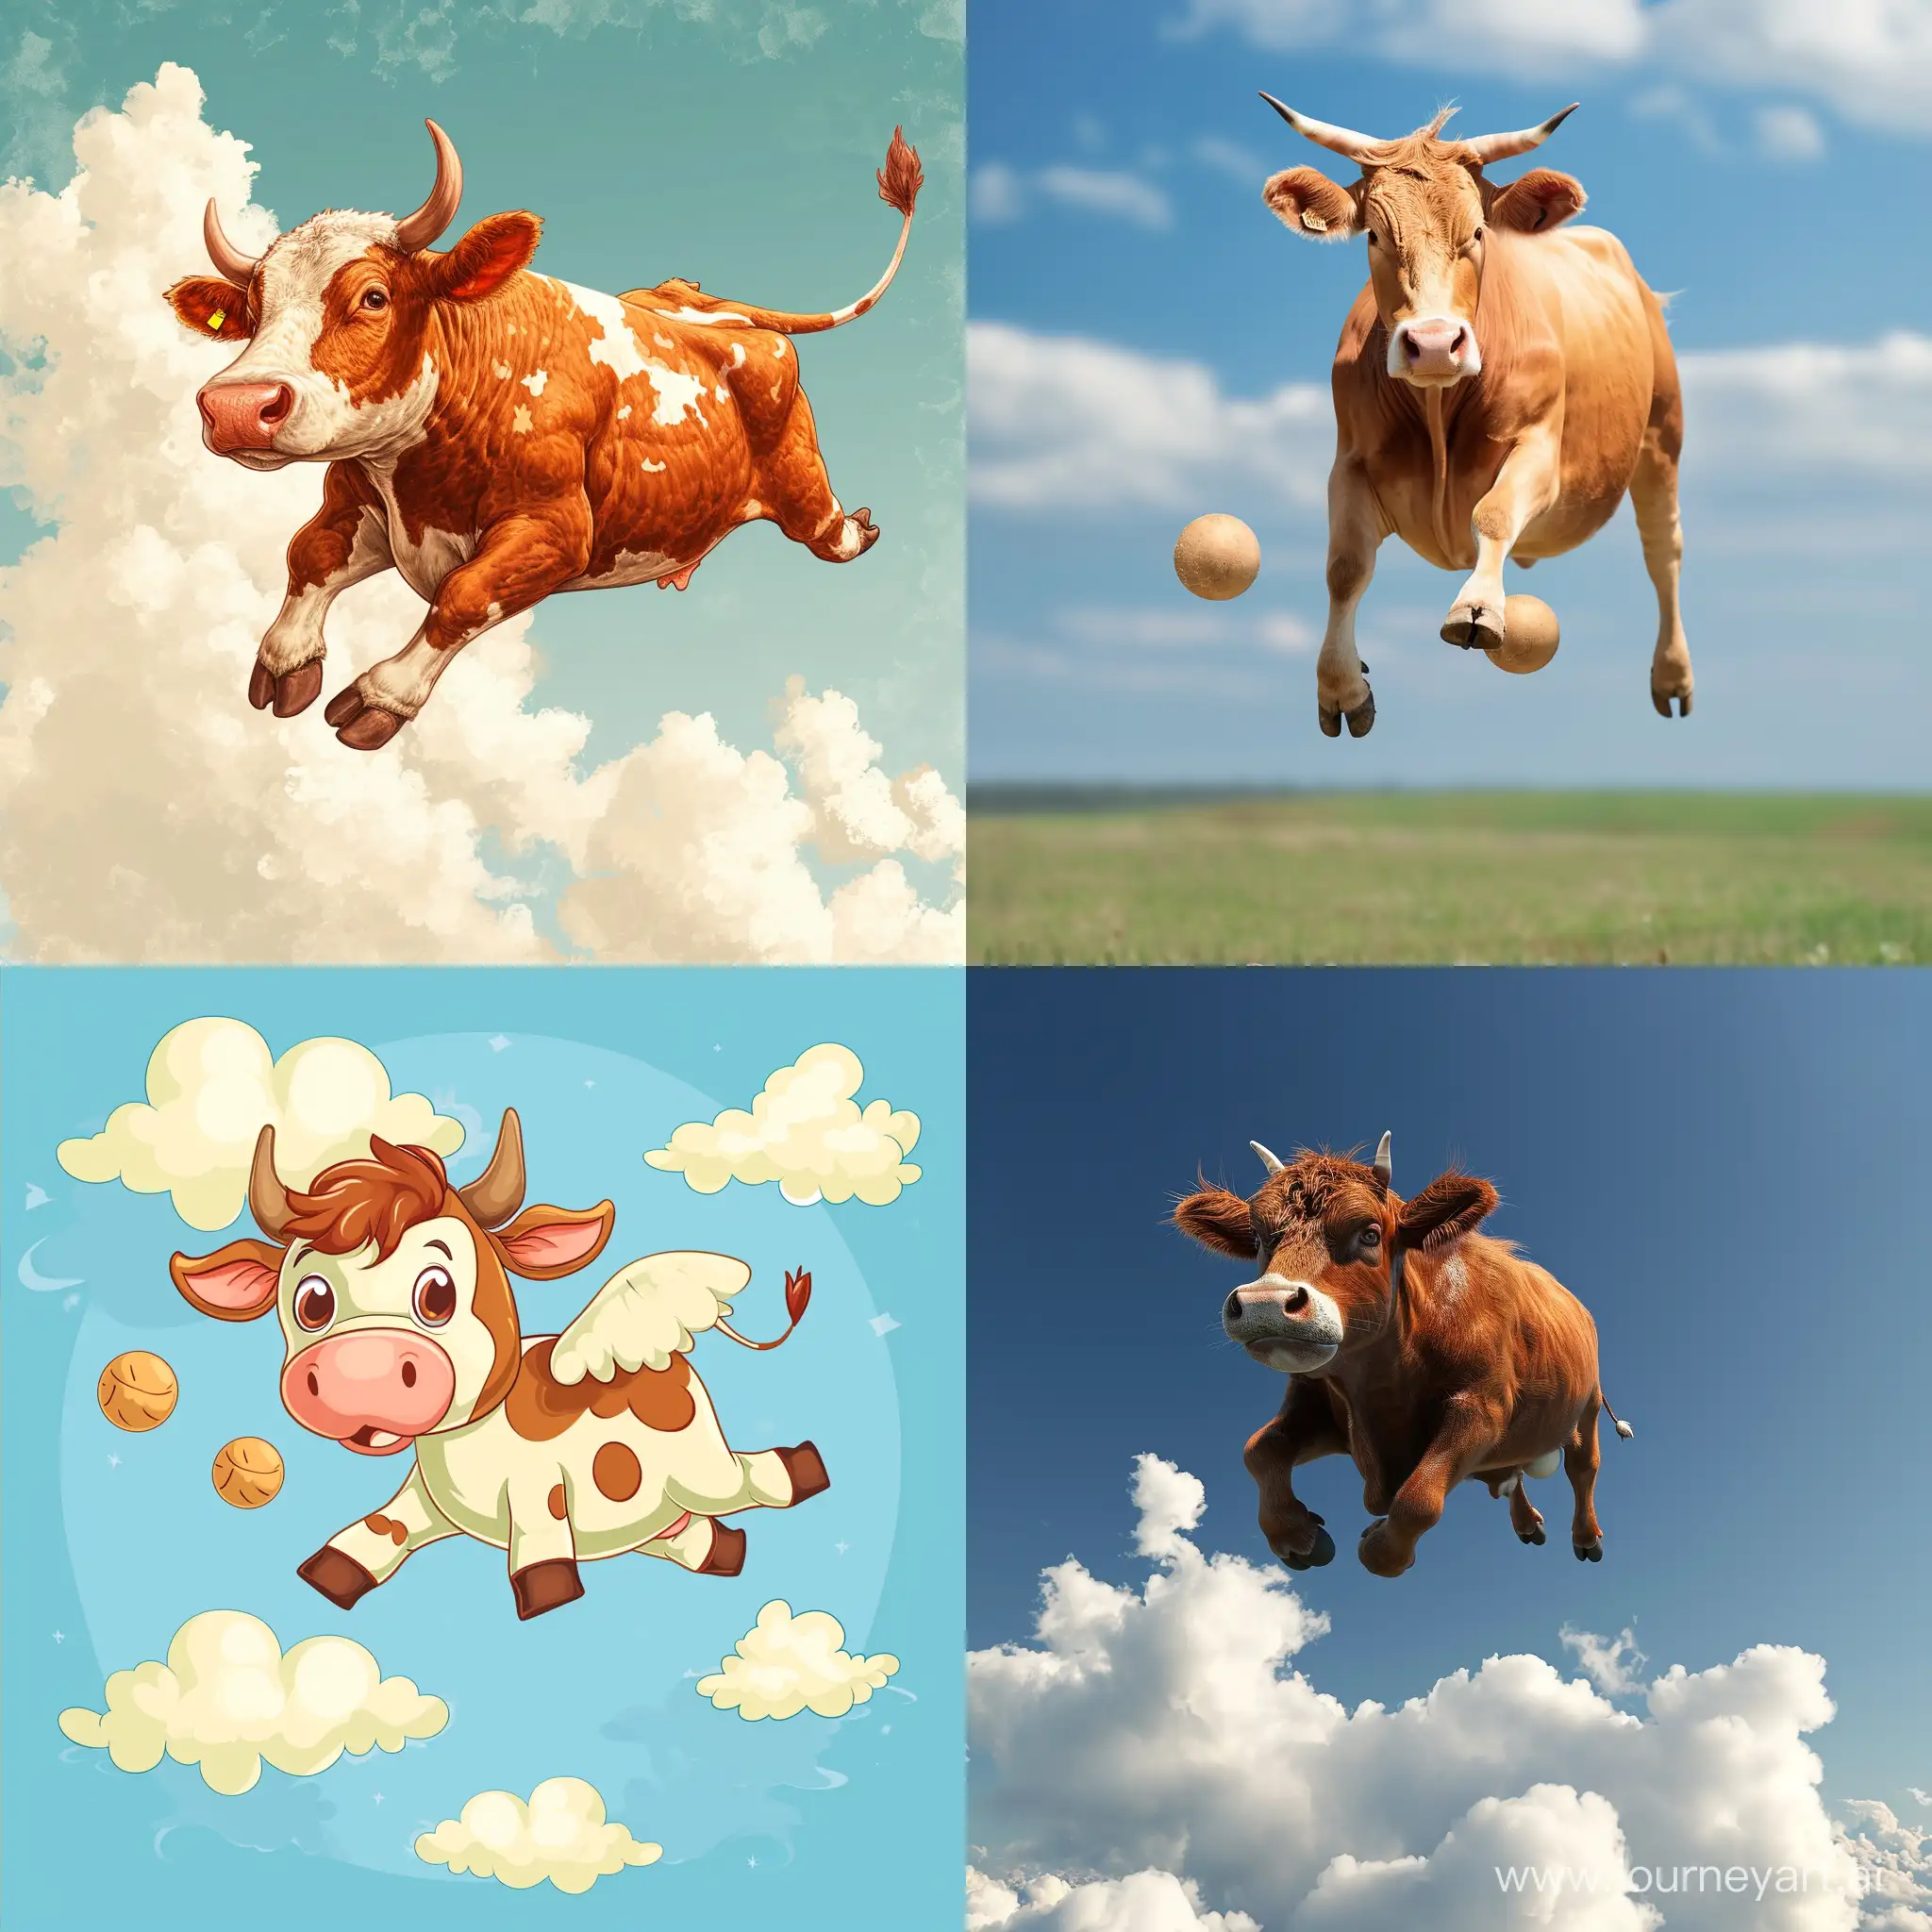 Flyimg cow with big balls